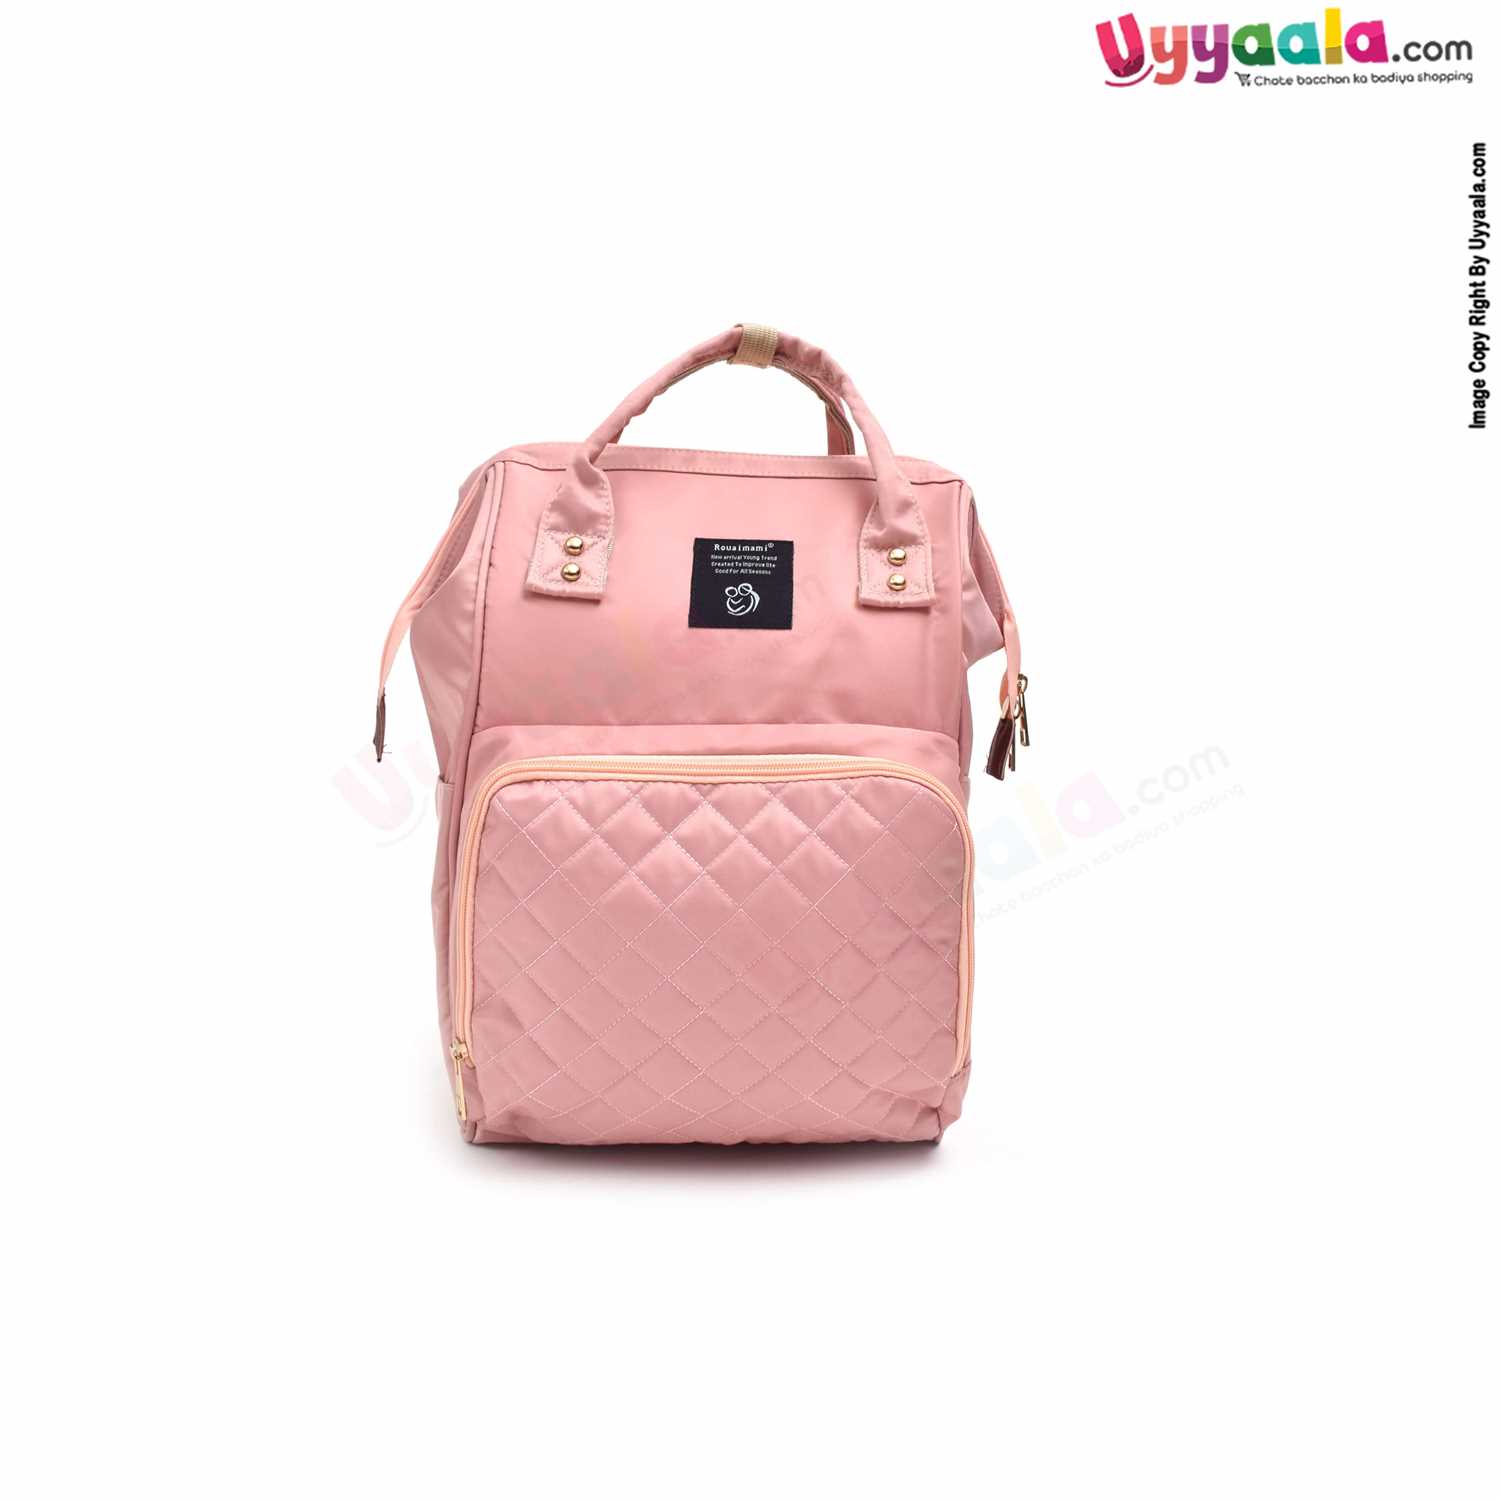 Mother's back pack (diaper bag) comfortable for travelling mothers, premium quality, size(45*34cm) - Pink